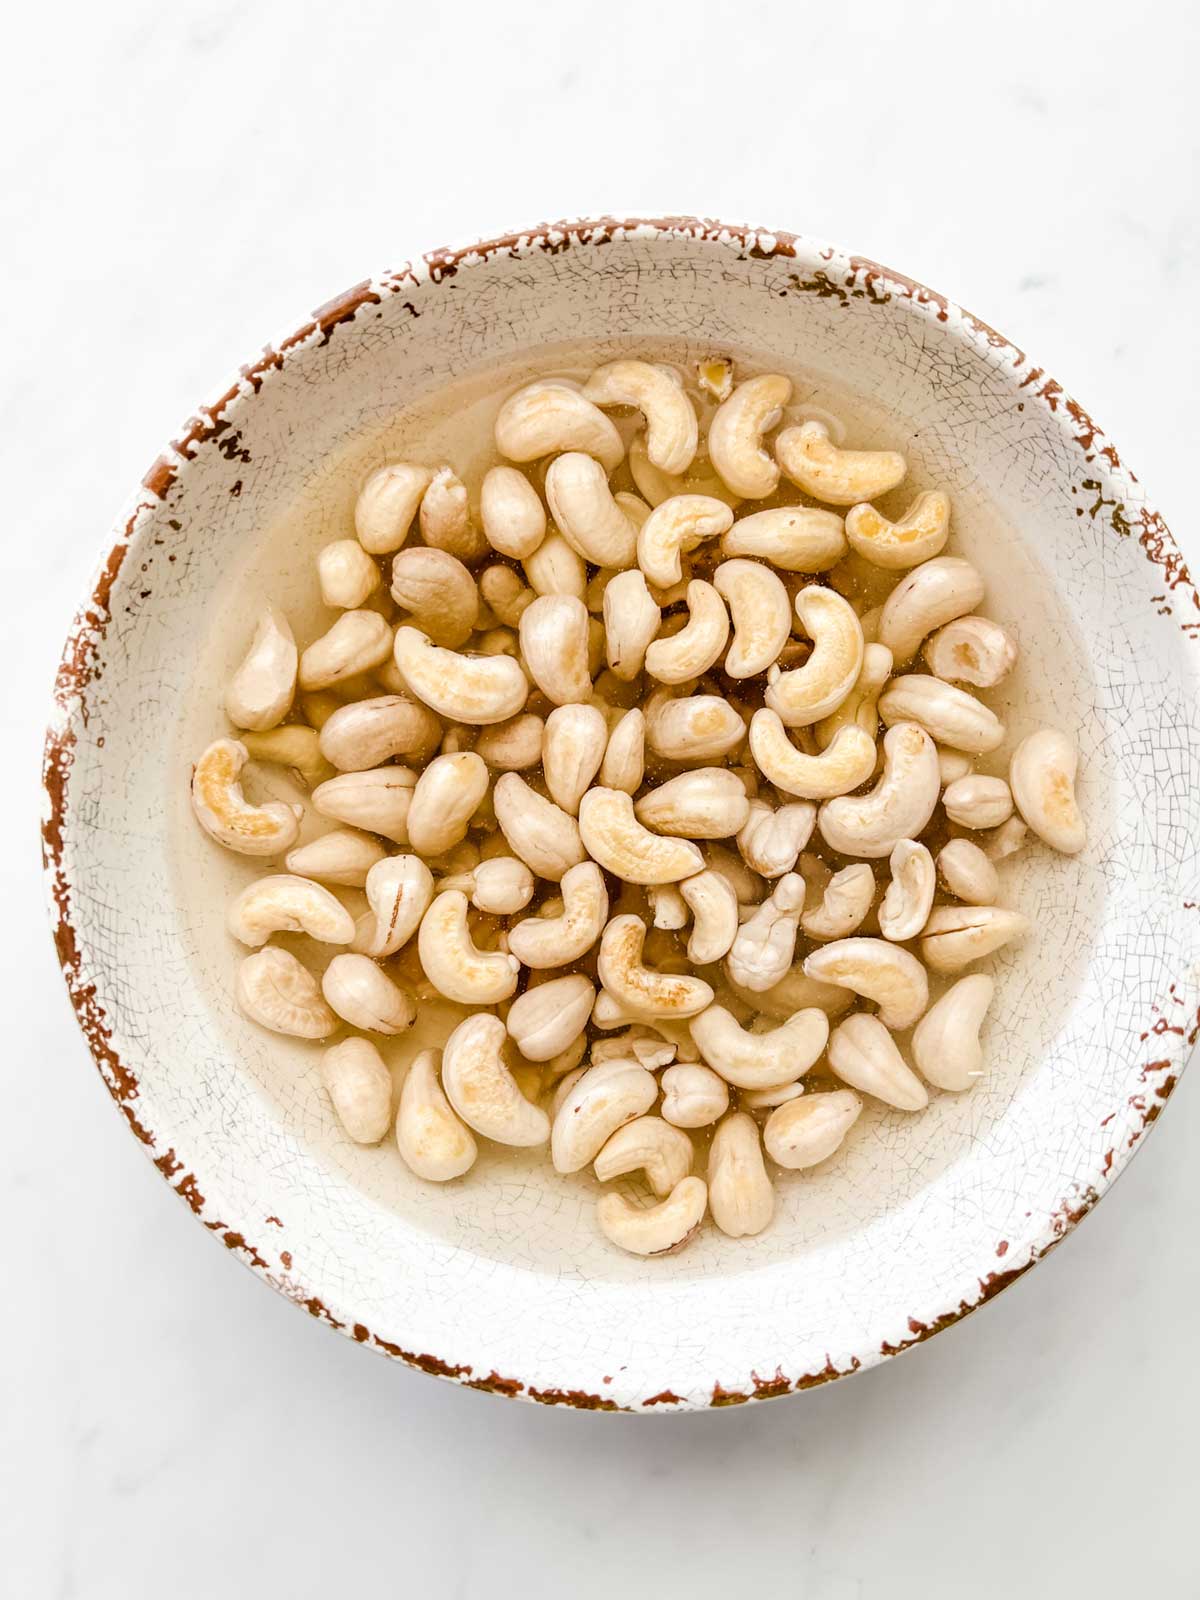 Photo of a bowl of raw cashews soaking in water.